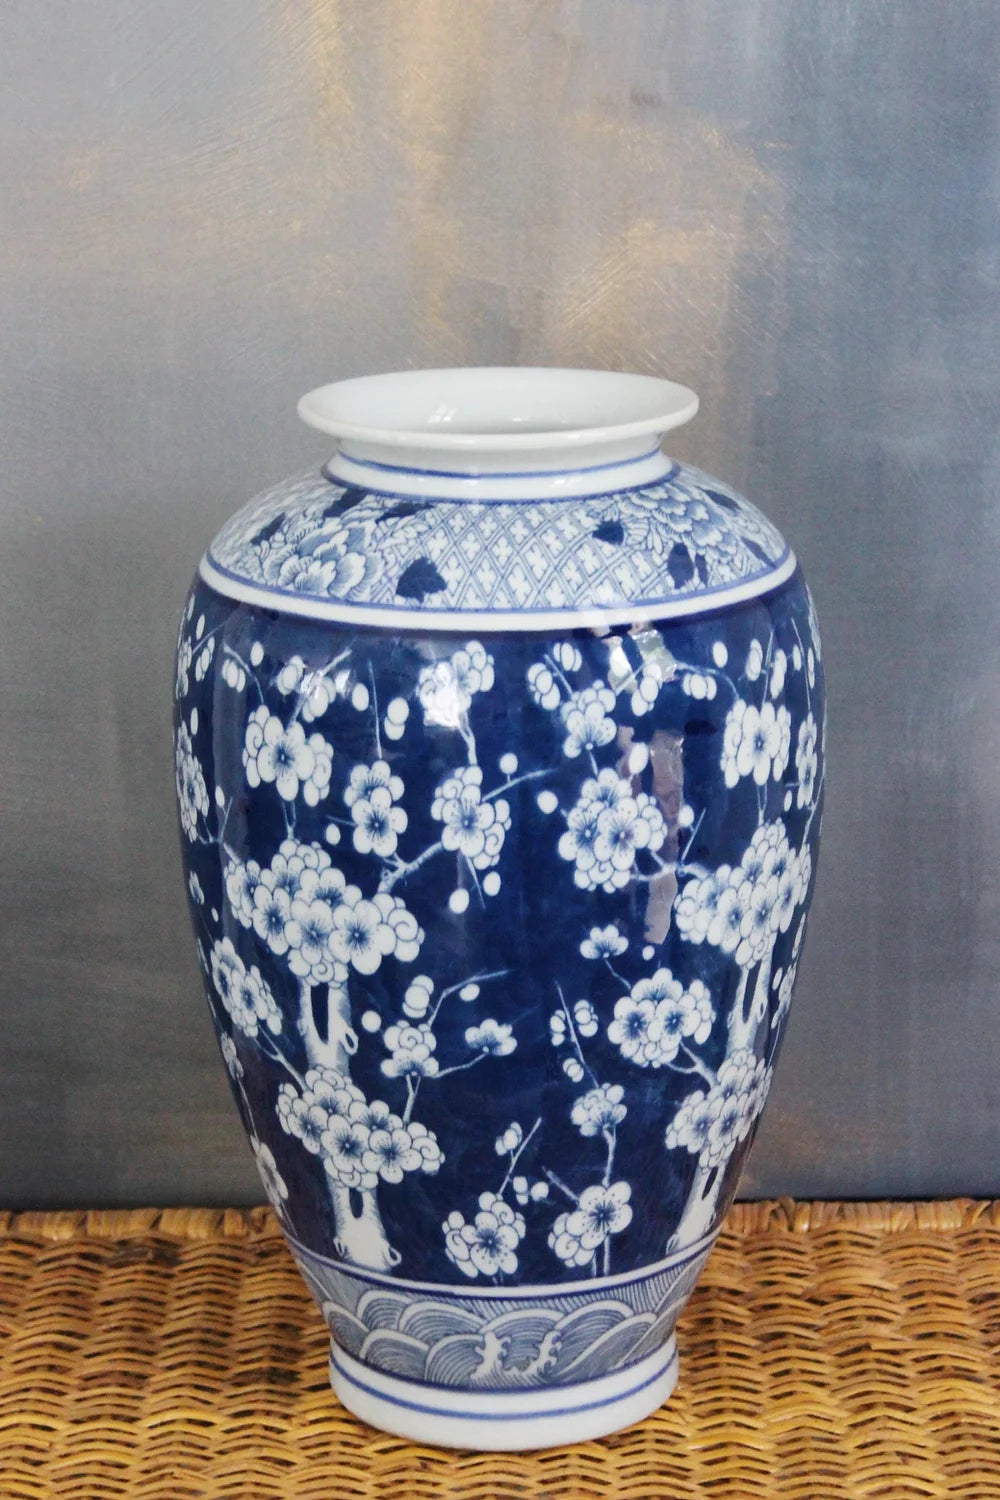 blue and white large plum blossom vase won a wicker pedestal